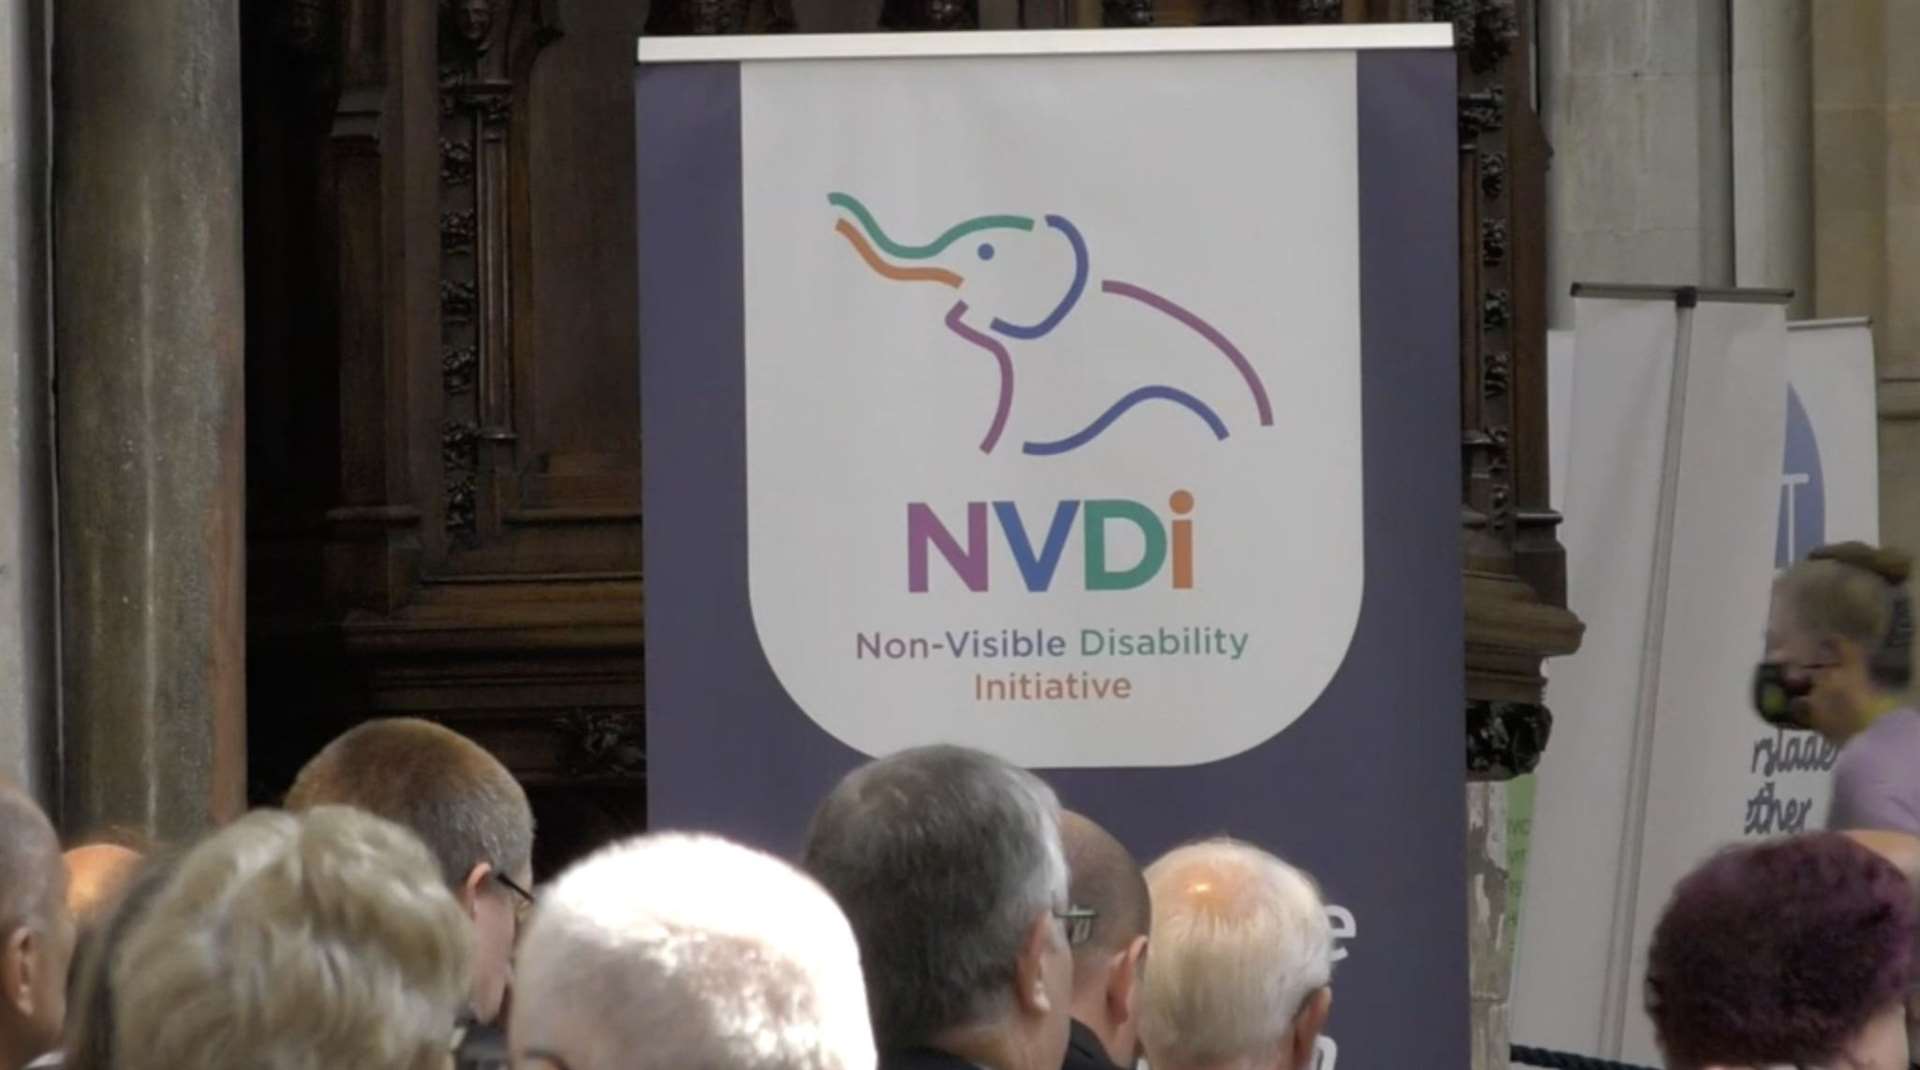 The NVDi hopes to lead the way for better understanding across the UK